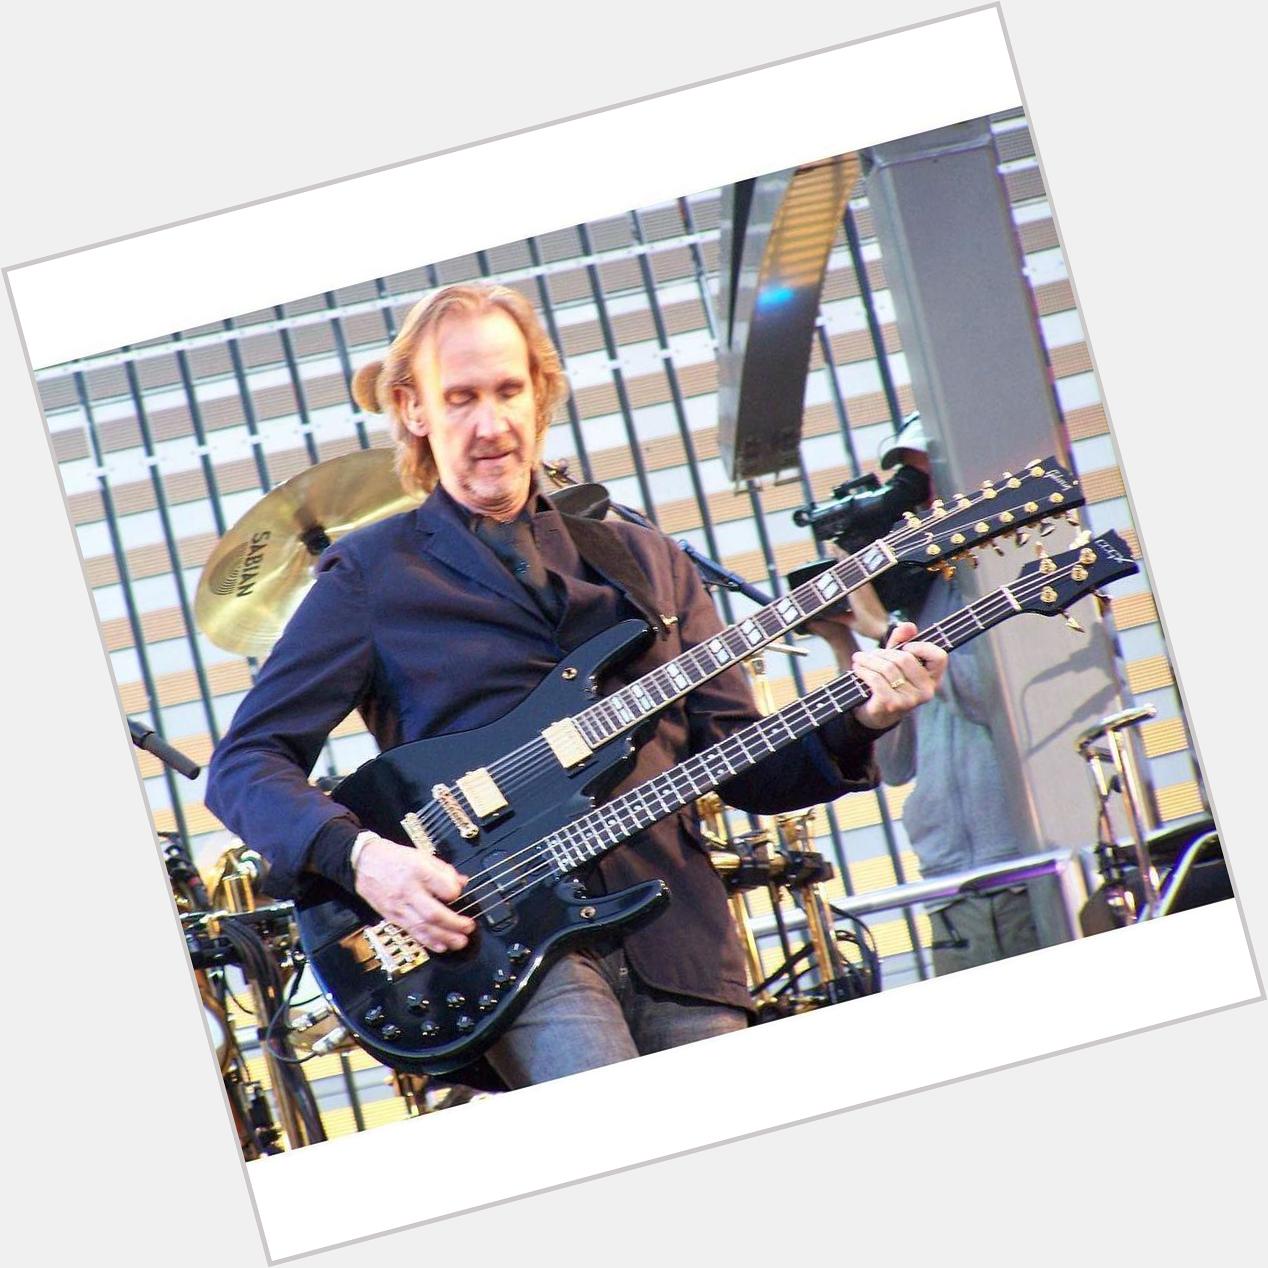 | Happy birthday Mr. Mike Rutherford, 65 today |

He is an English musician and a founding member of Genesis and on 